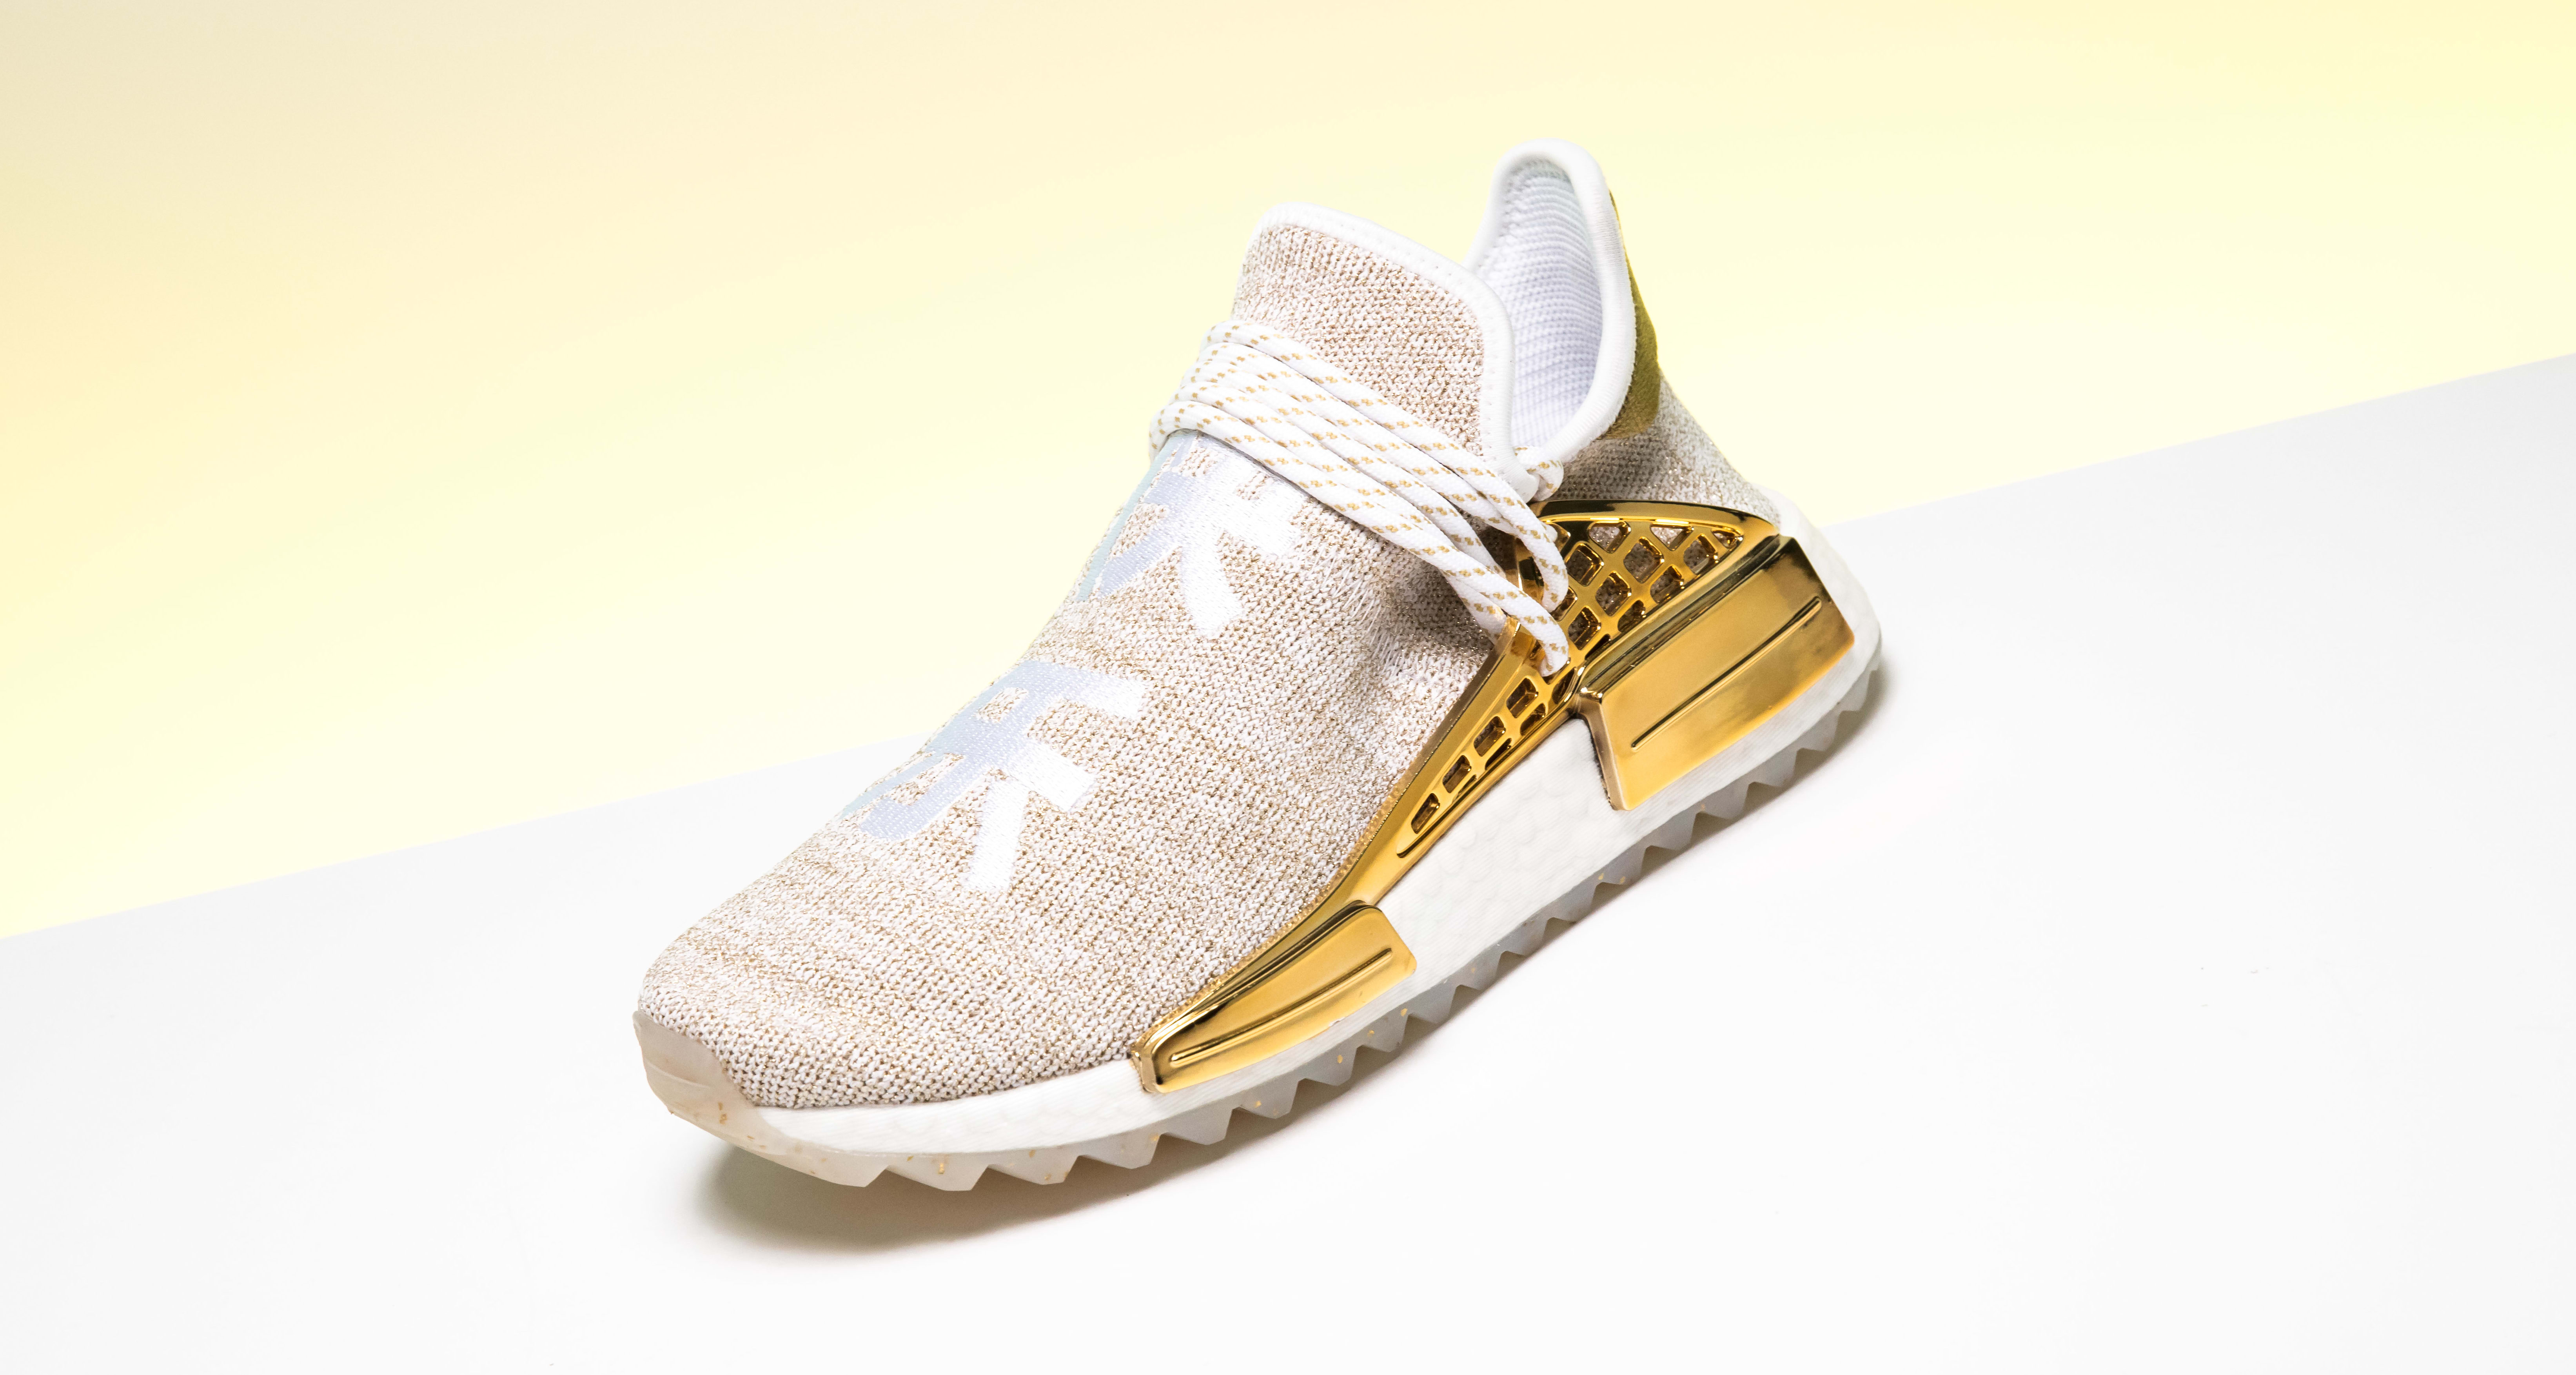 Pharrell Williams x Adidas NMD Hu 'China' Gold F99762 Available Now | Sole  Collector